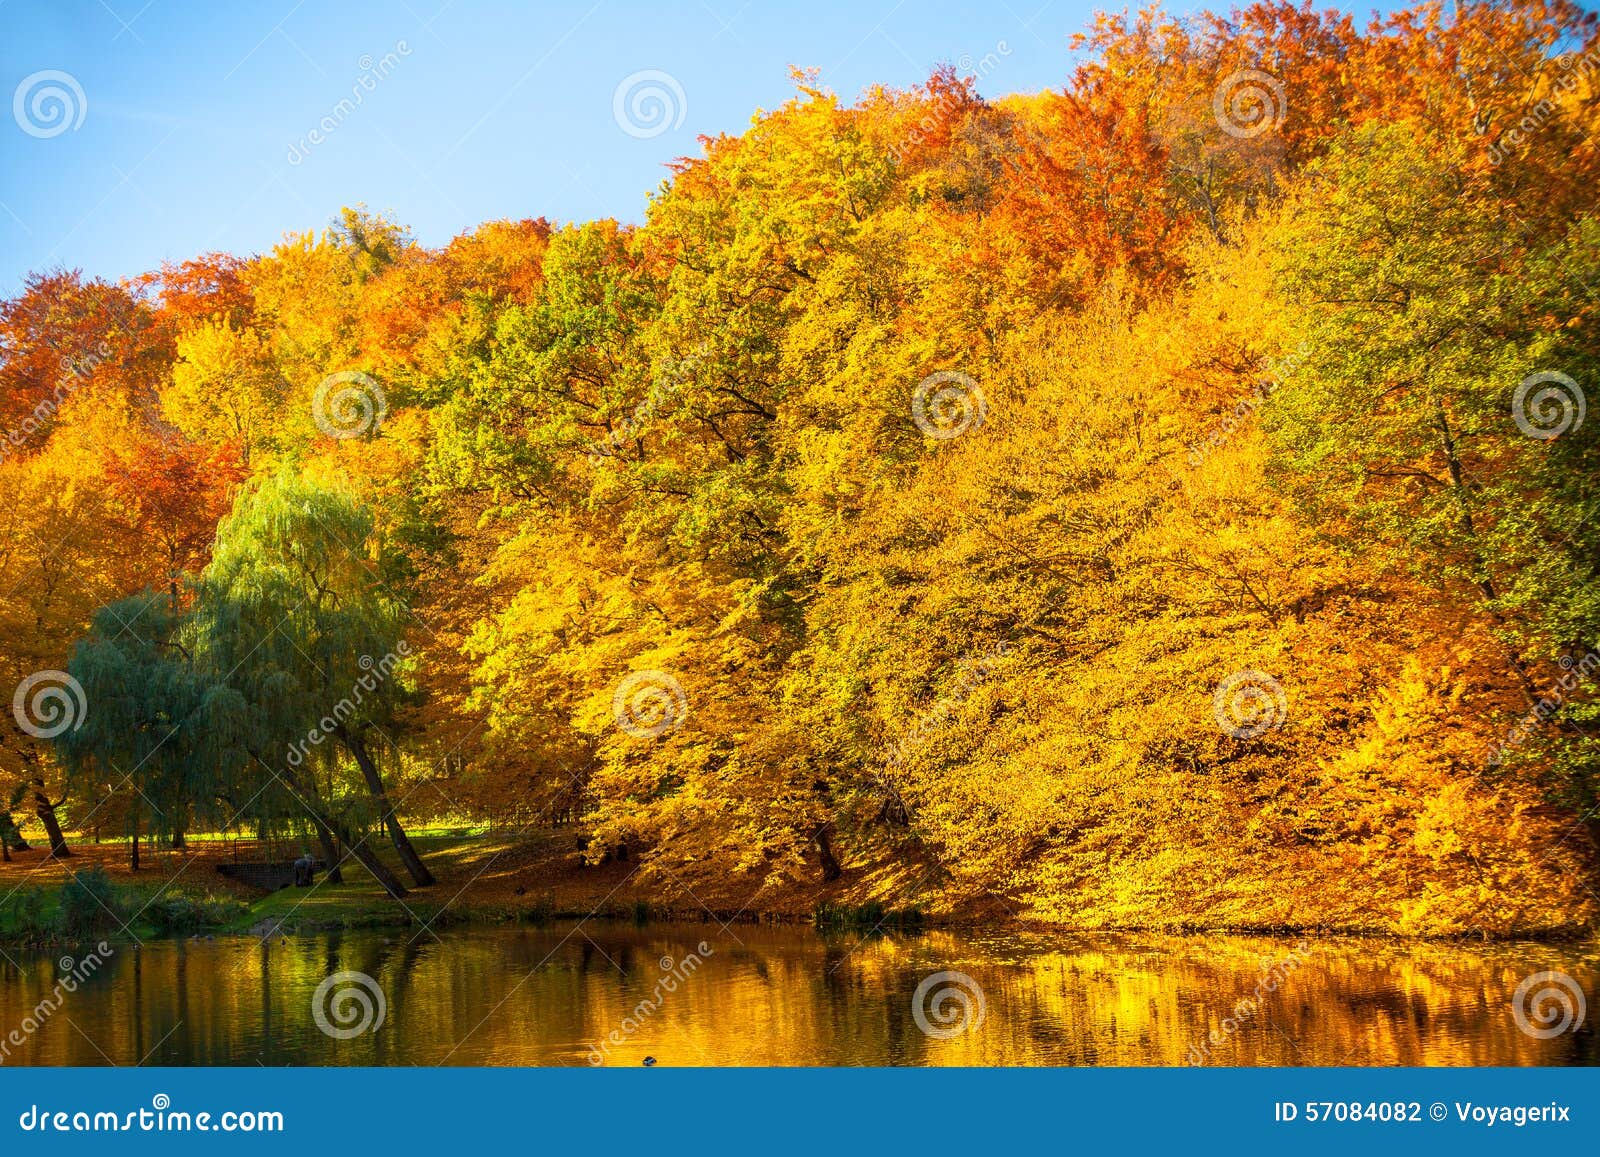 Water with Autumn Trees in Park Stock Photo - Image of water, orange ...